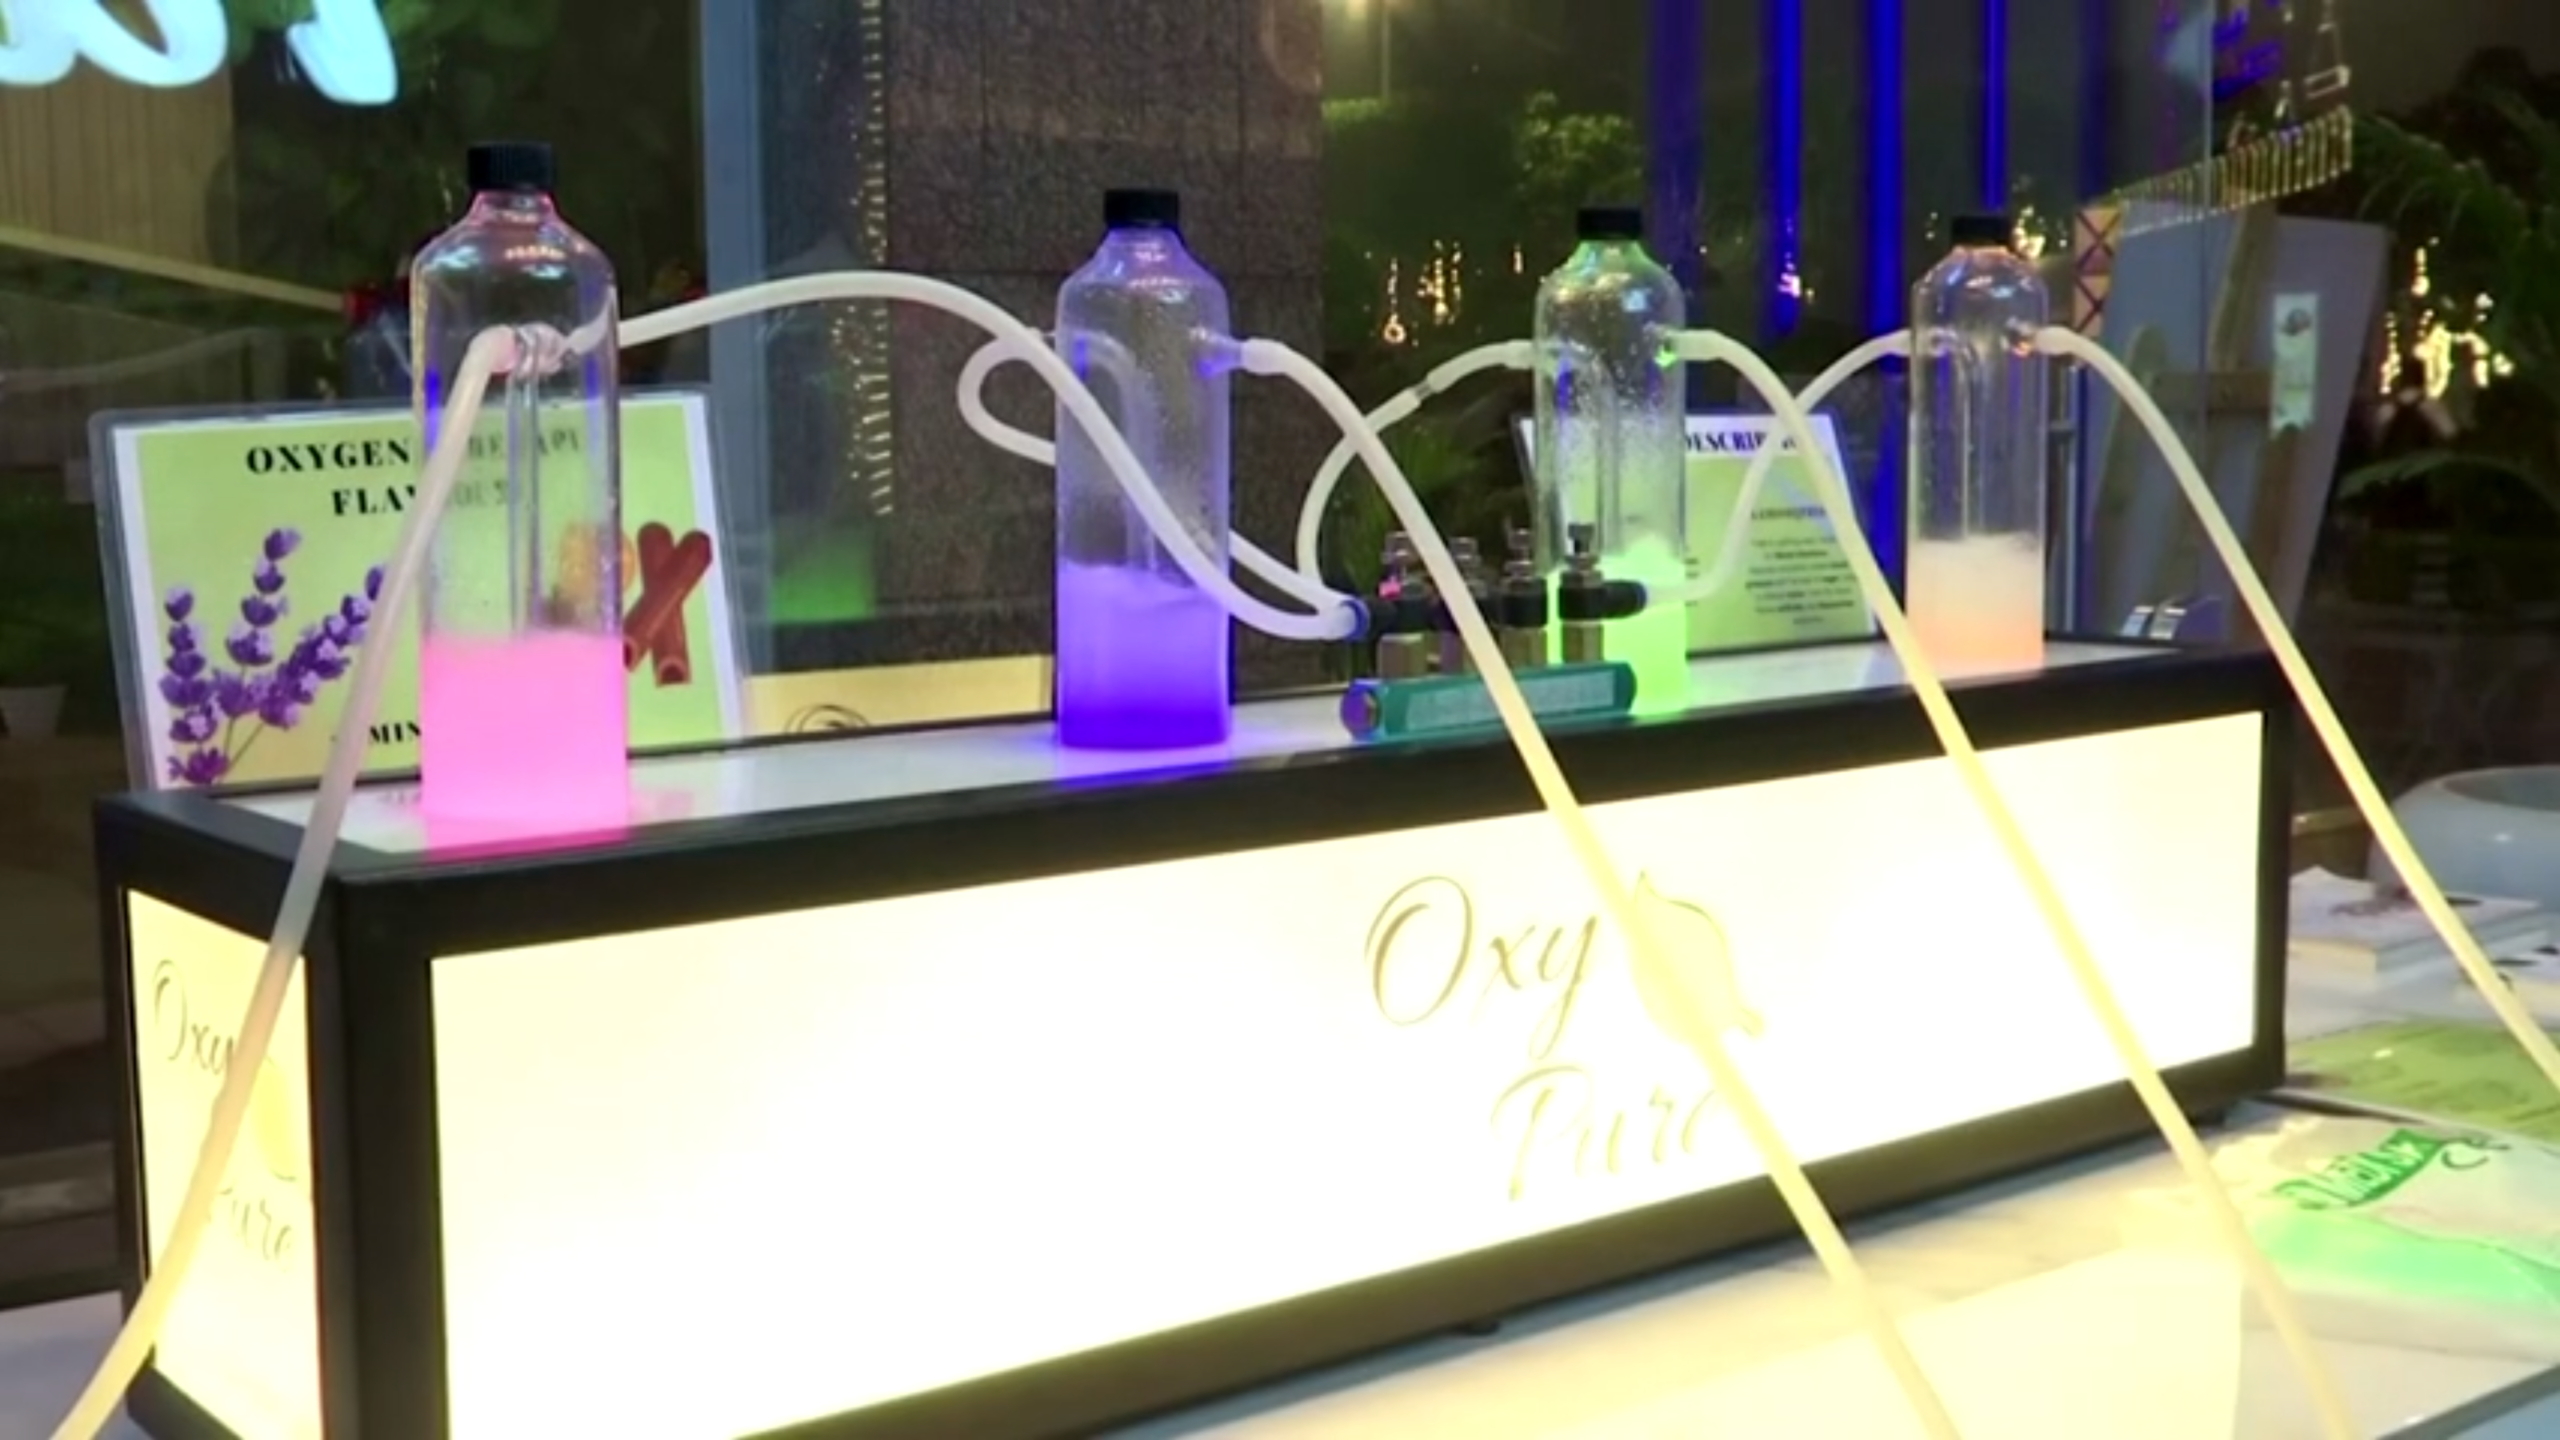 Photo of an oxygen bar in Delhi, India on 15 November 2019. A 15-minute session costs $7.00. Photo: Reuters